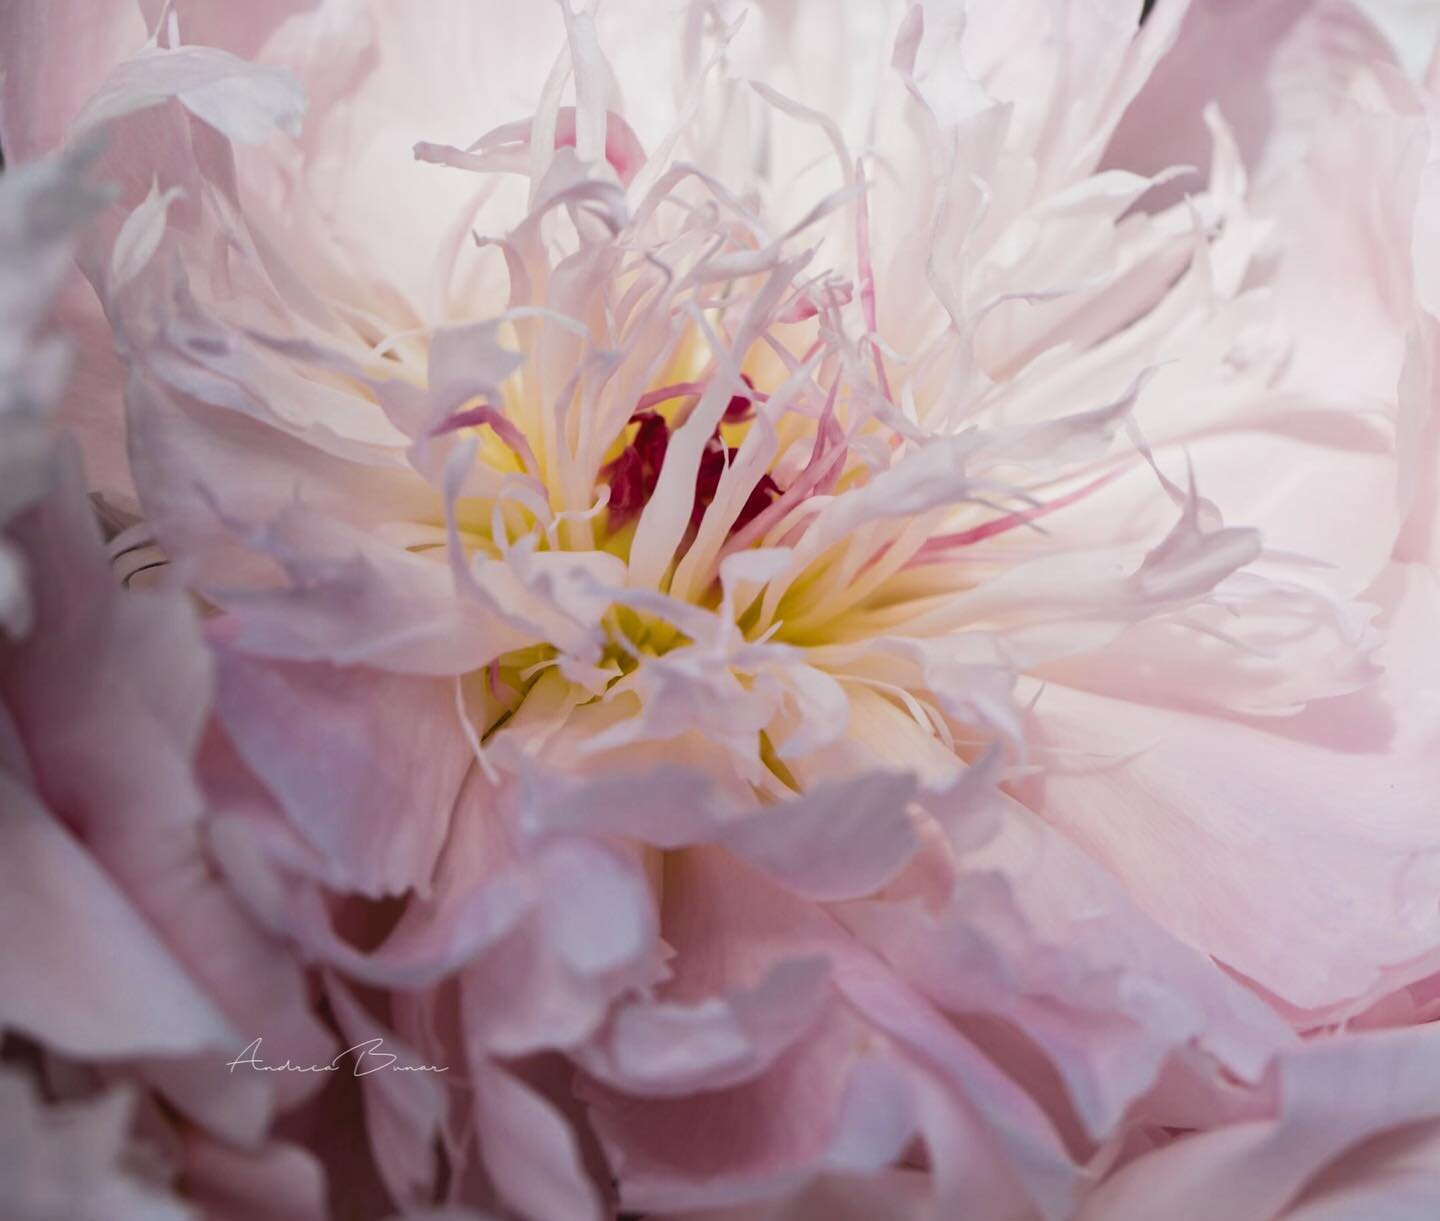 &ldquo;Mother's love is the fuel that enables a normal human being to do
the impossible.&rdquo; 
~Marion C. Garretty 

#capecodlife #capecodflowerfarmer #capecodflowers #peonies #floweraddict #flowerstagram #flowerphotography #floral #macroflower #ma